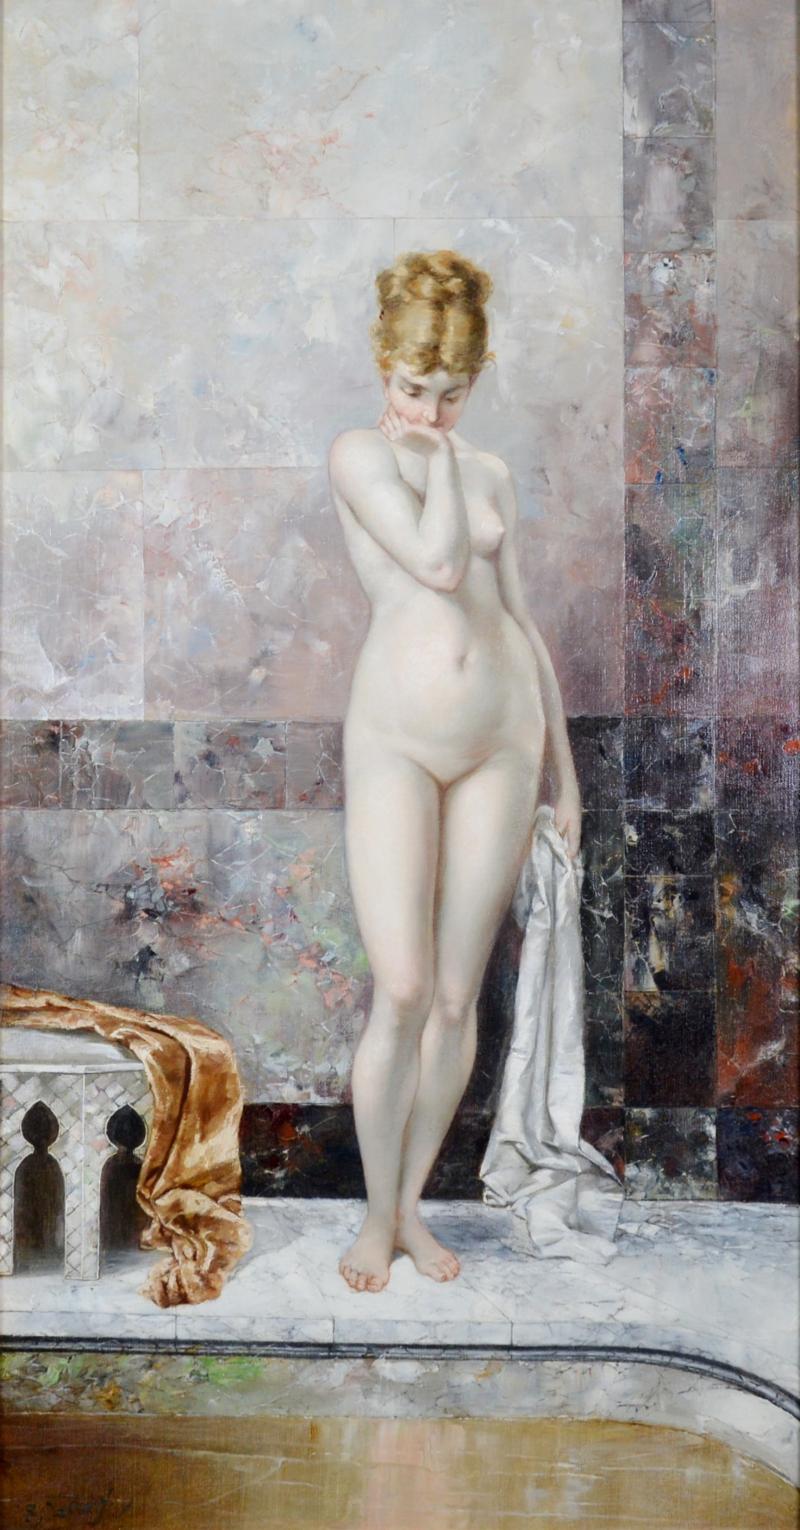 Geskel Saloman Apprehension 19th Century French Exhibition Oil Painting Nude Portrait